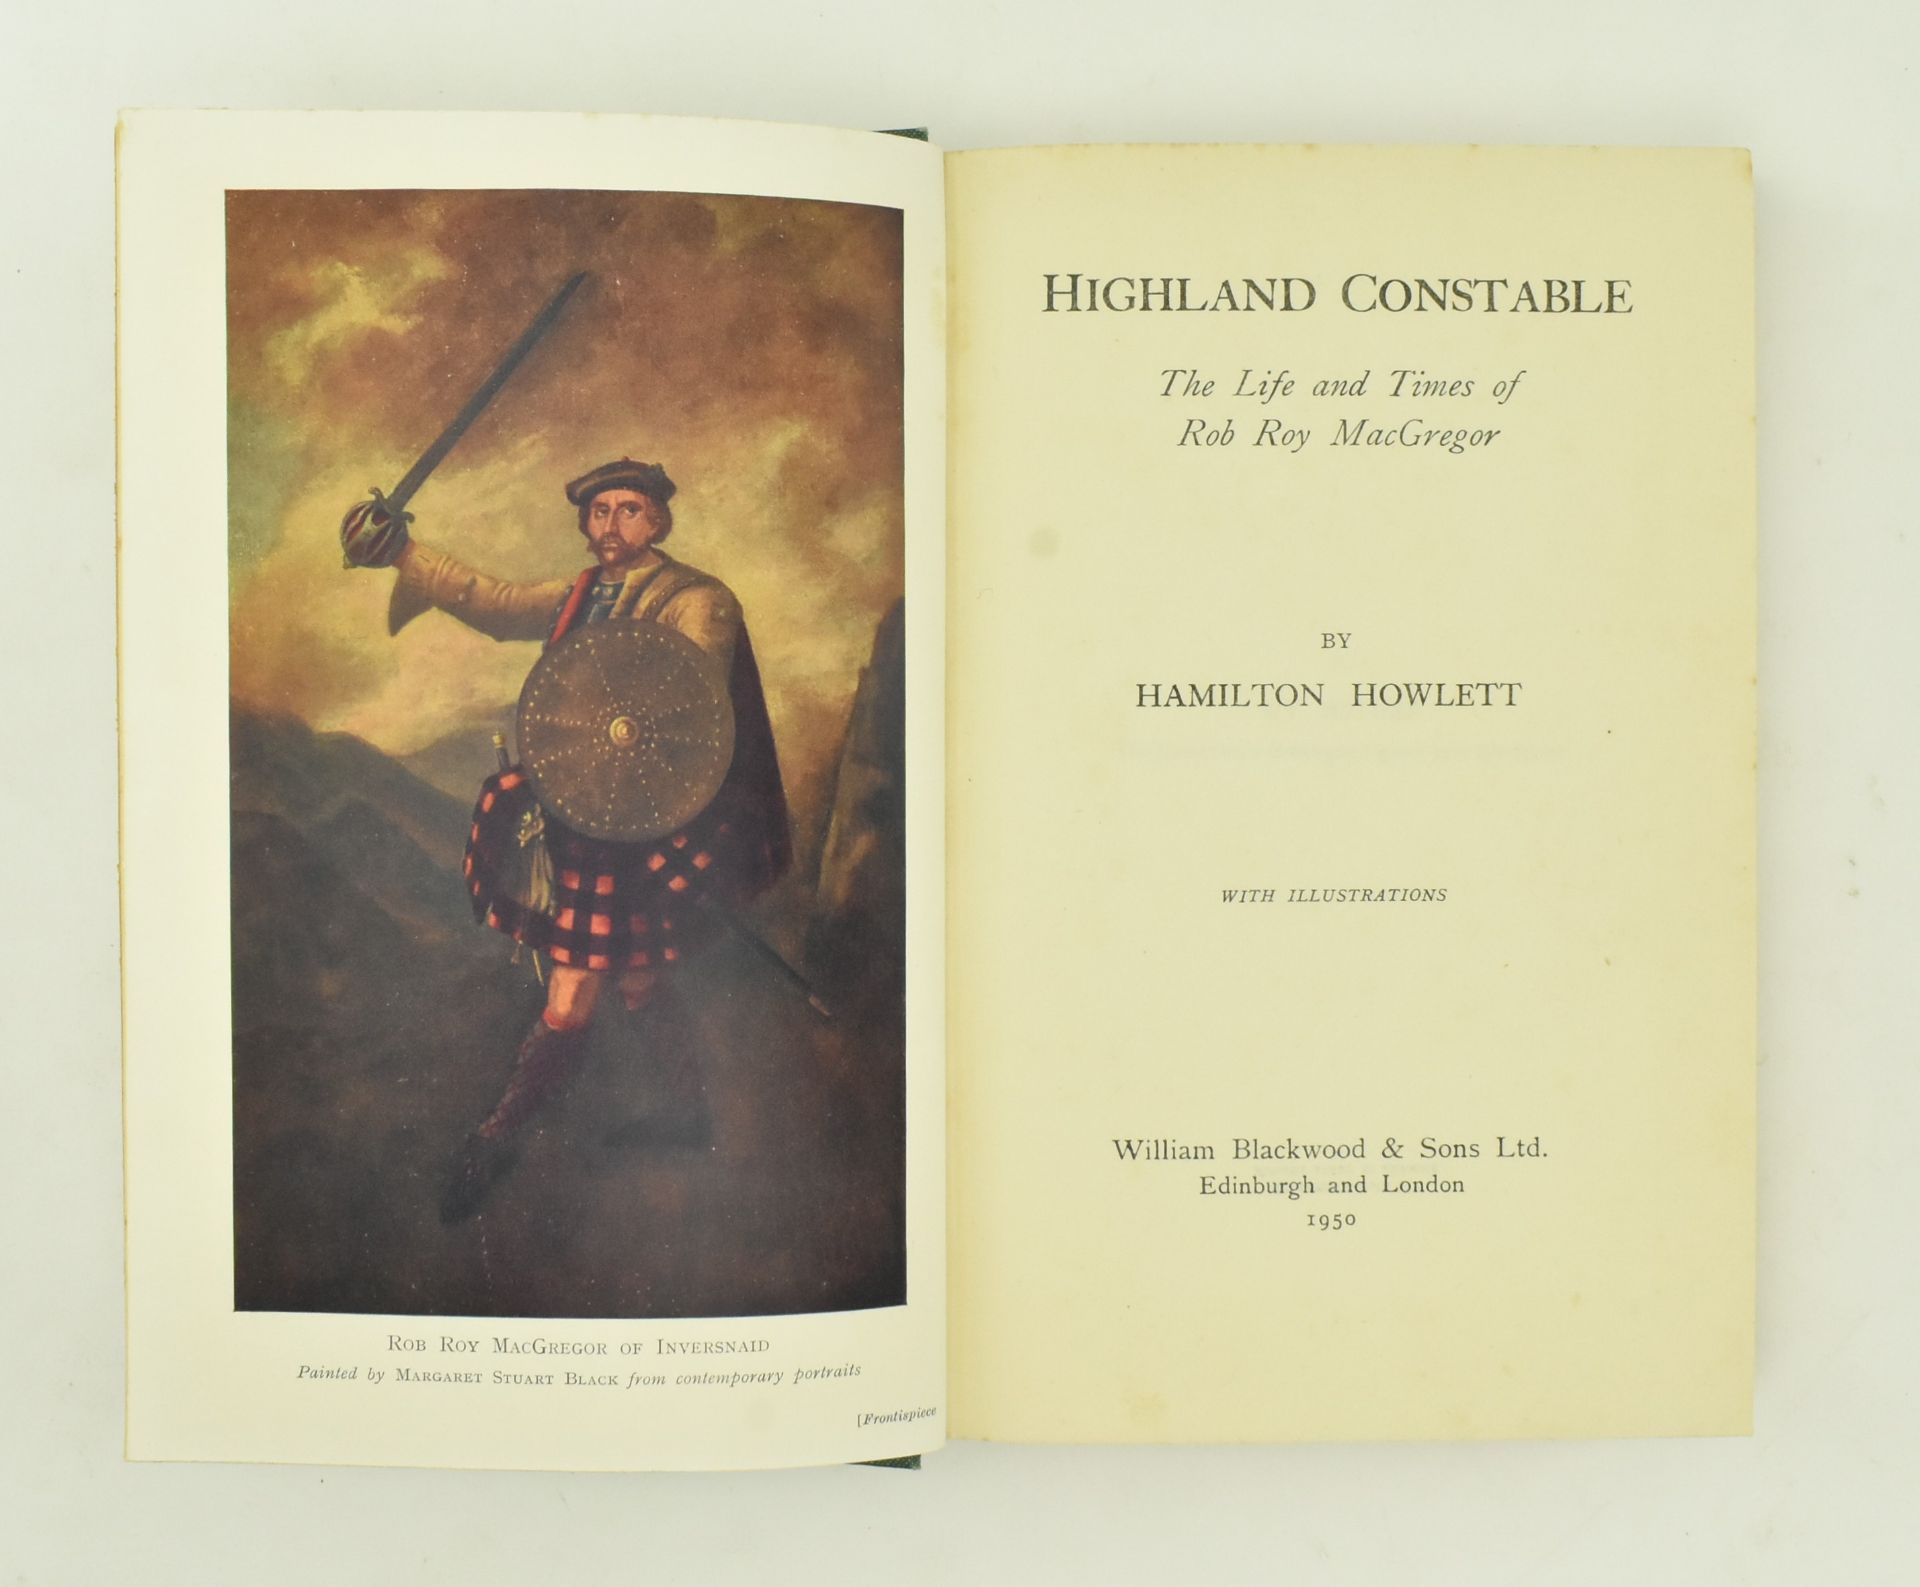 SCOTTISH HISTORY. COLLECTION OF BOOKS RELATING TO SCOTLAND - Image 10 of 10